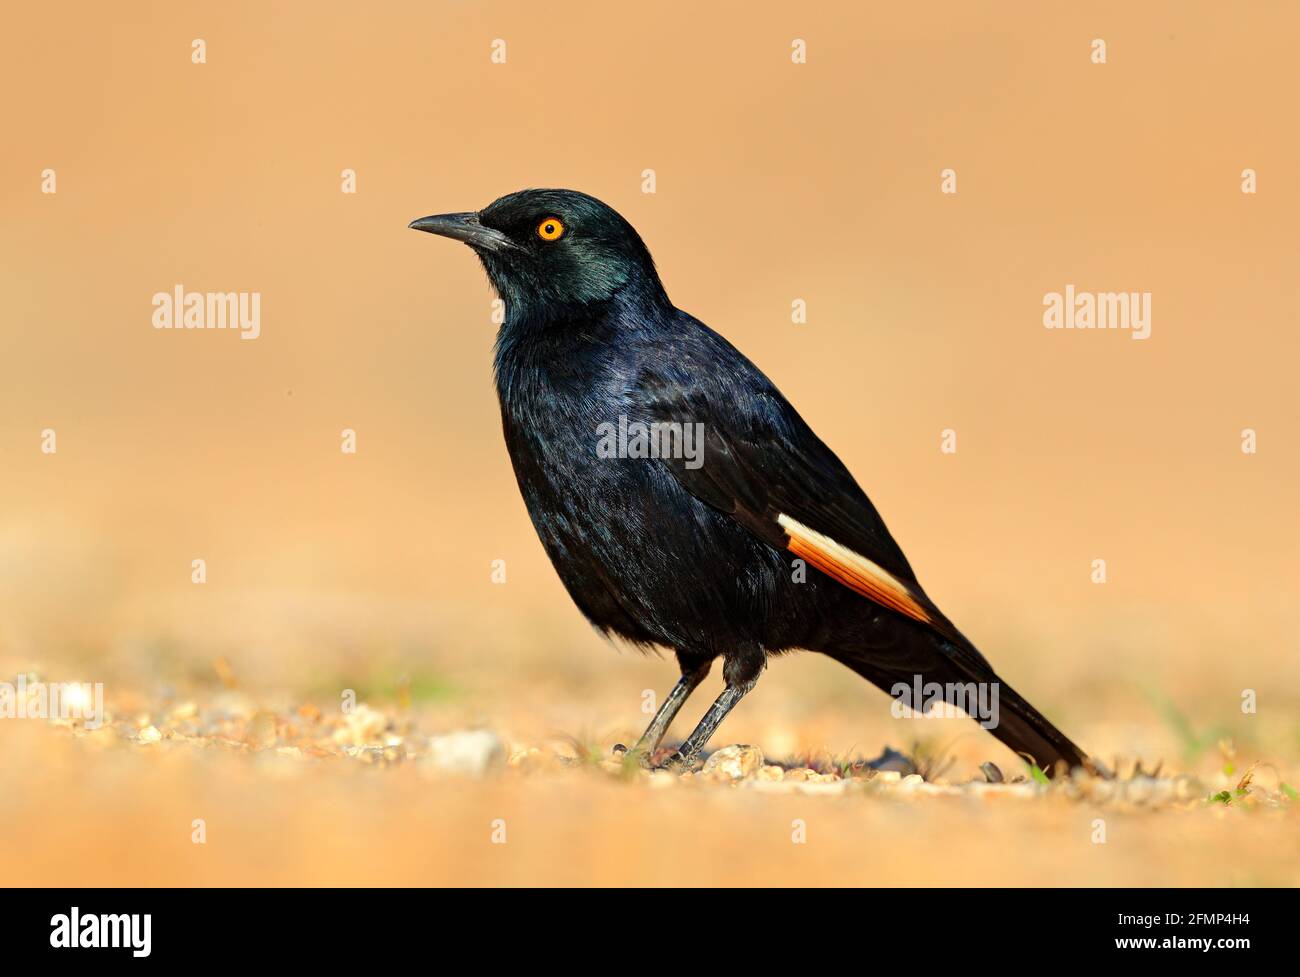 Pale-winged starling, Onychognathus nabouroup, sitting on the stone in the nature habitat. Glossy Starling from the Etocha, Namibia. Beautiful shiny b Stock Photo